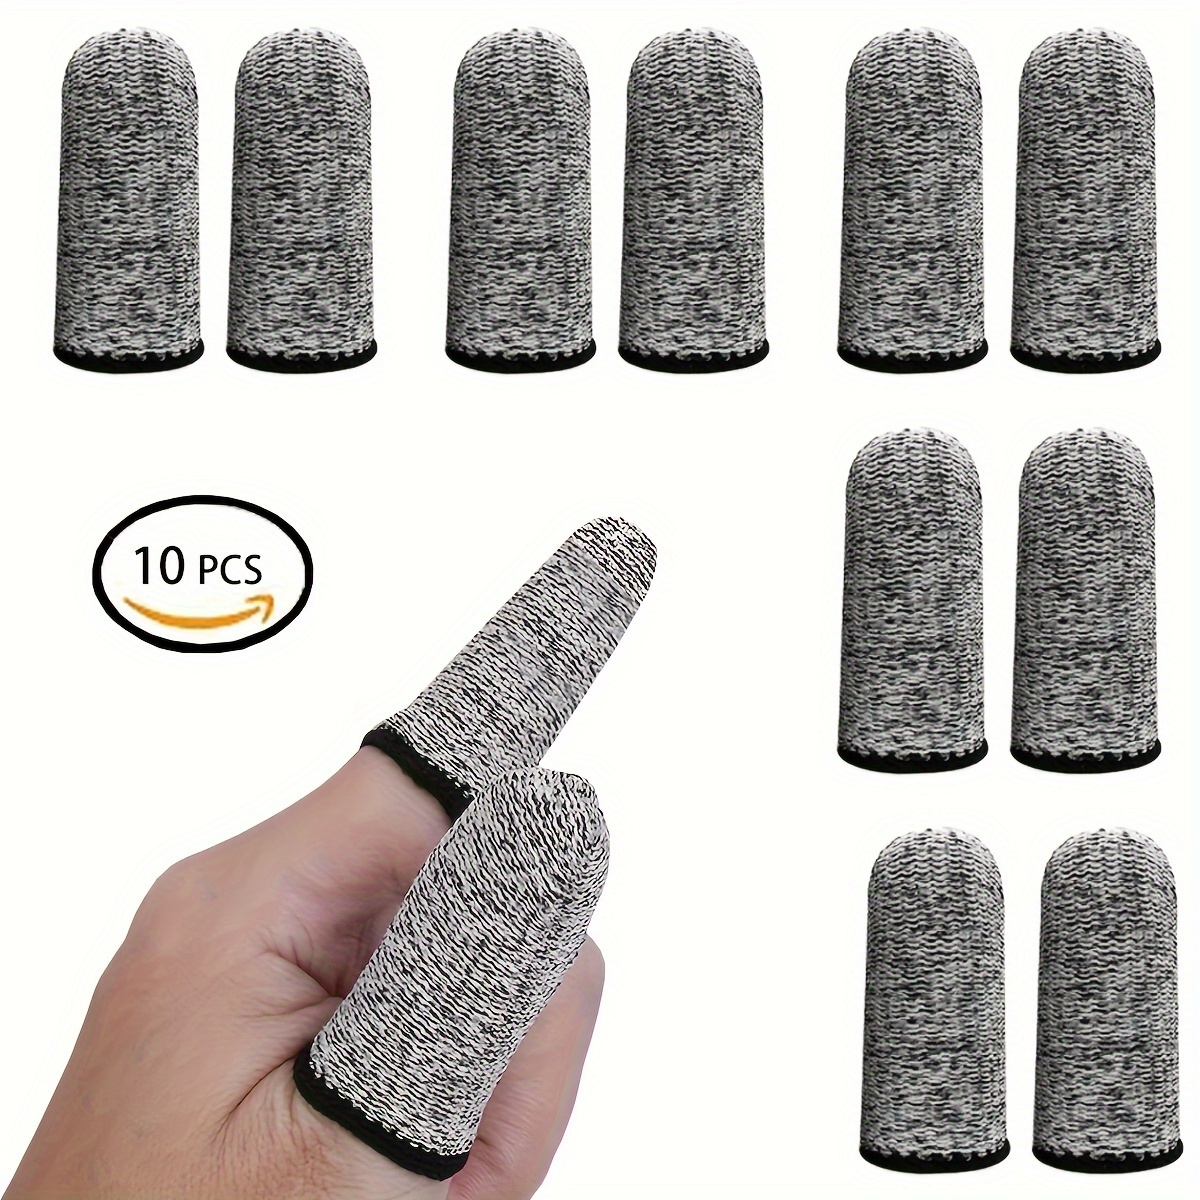 1/2Pcs Silicone Thimble Fingers Tip Sewing Anti-pricking Fingers